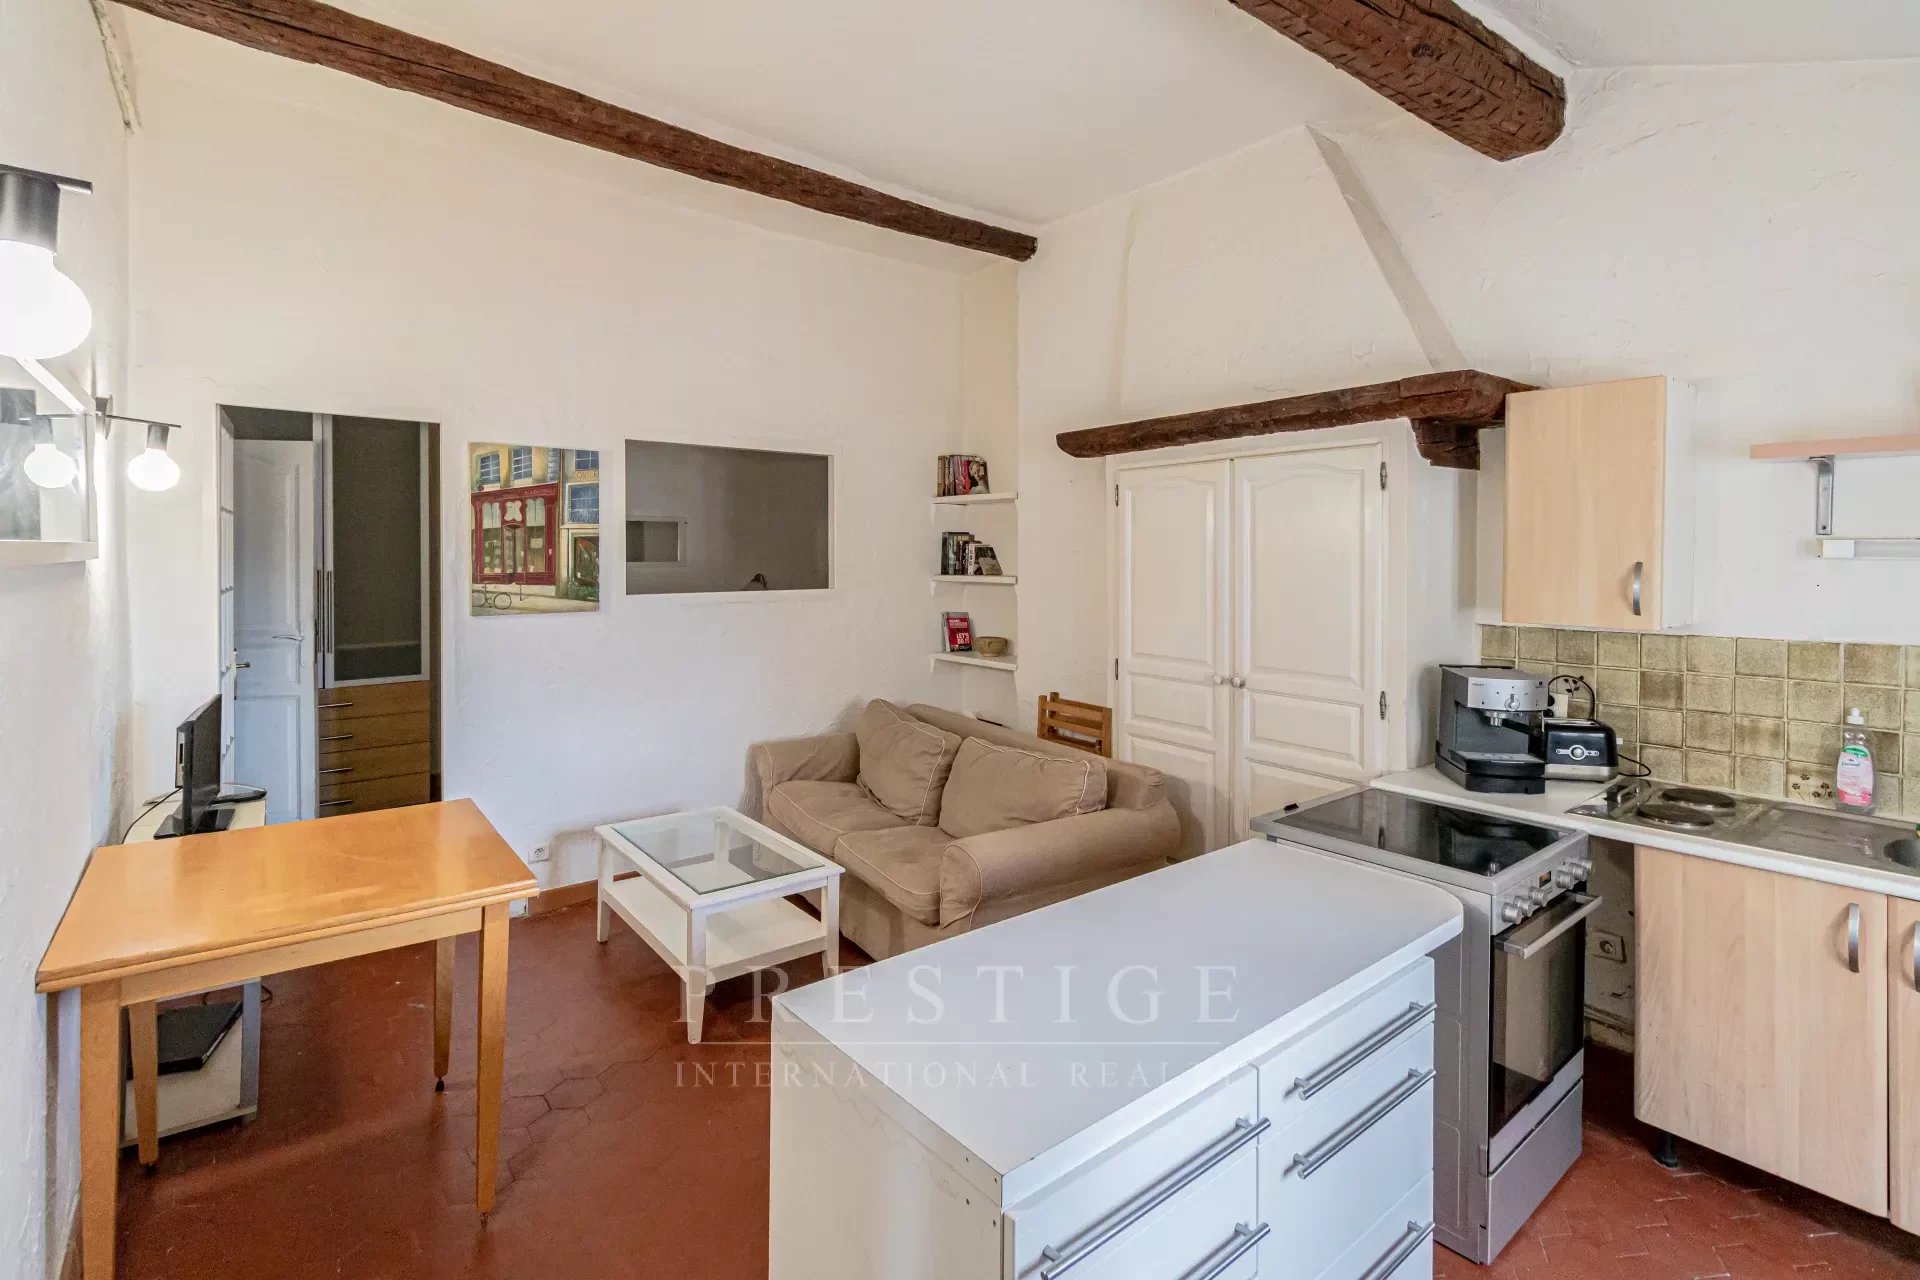 Old town of Antibes, 1 bedroom flat top floor with cave